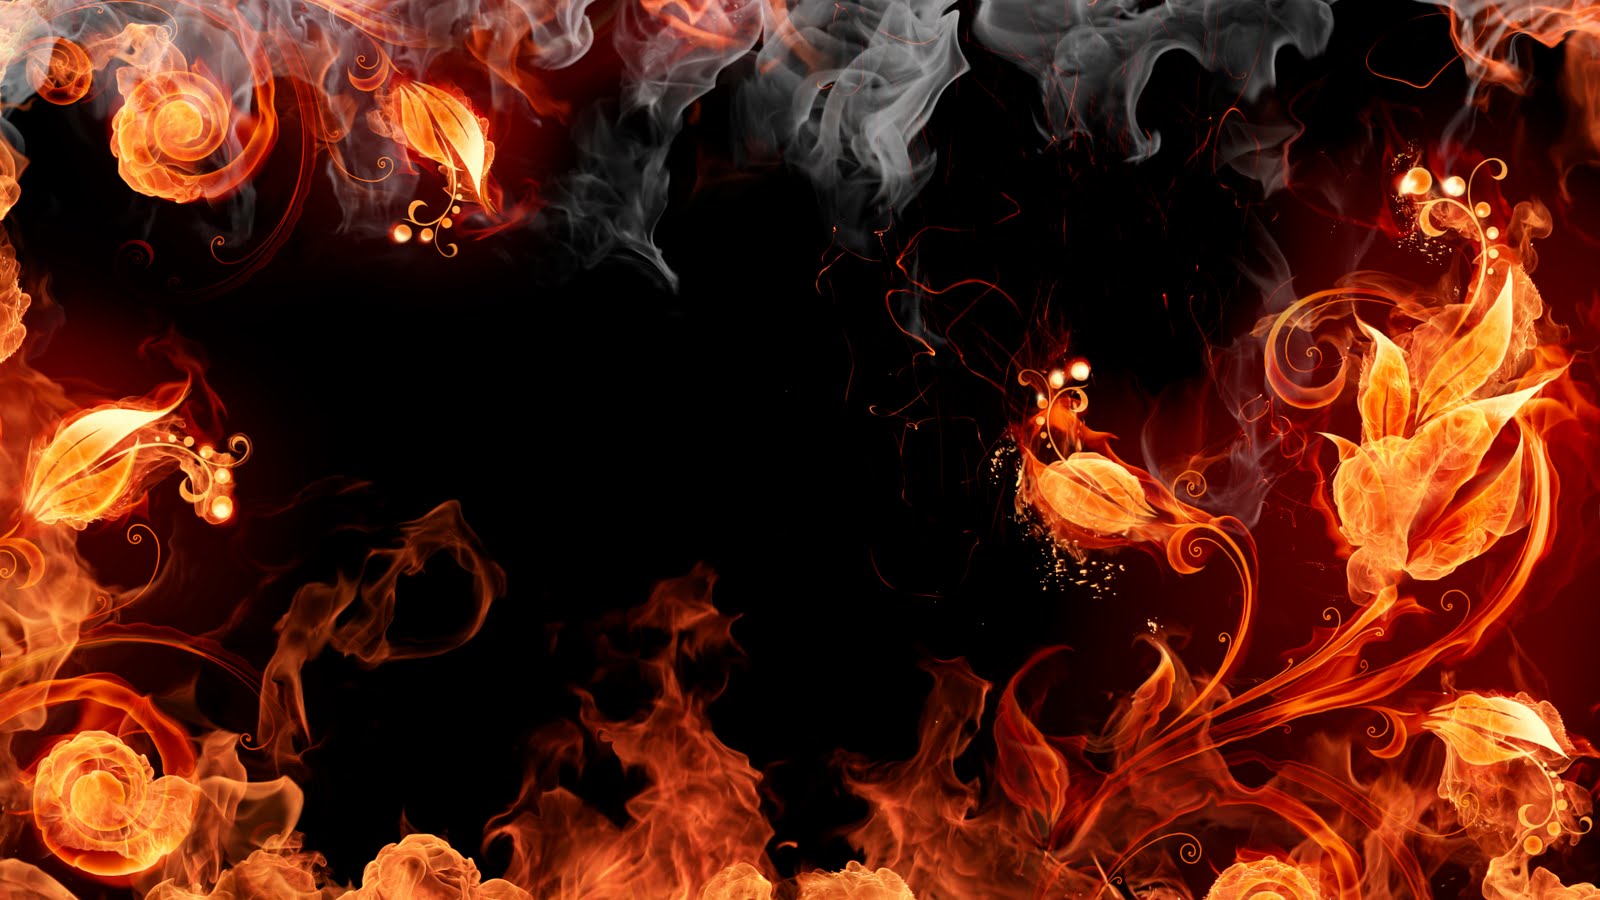 Red Fire Background wallpaper Red Fire Background hd wallpaper